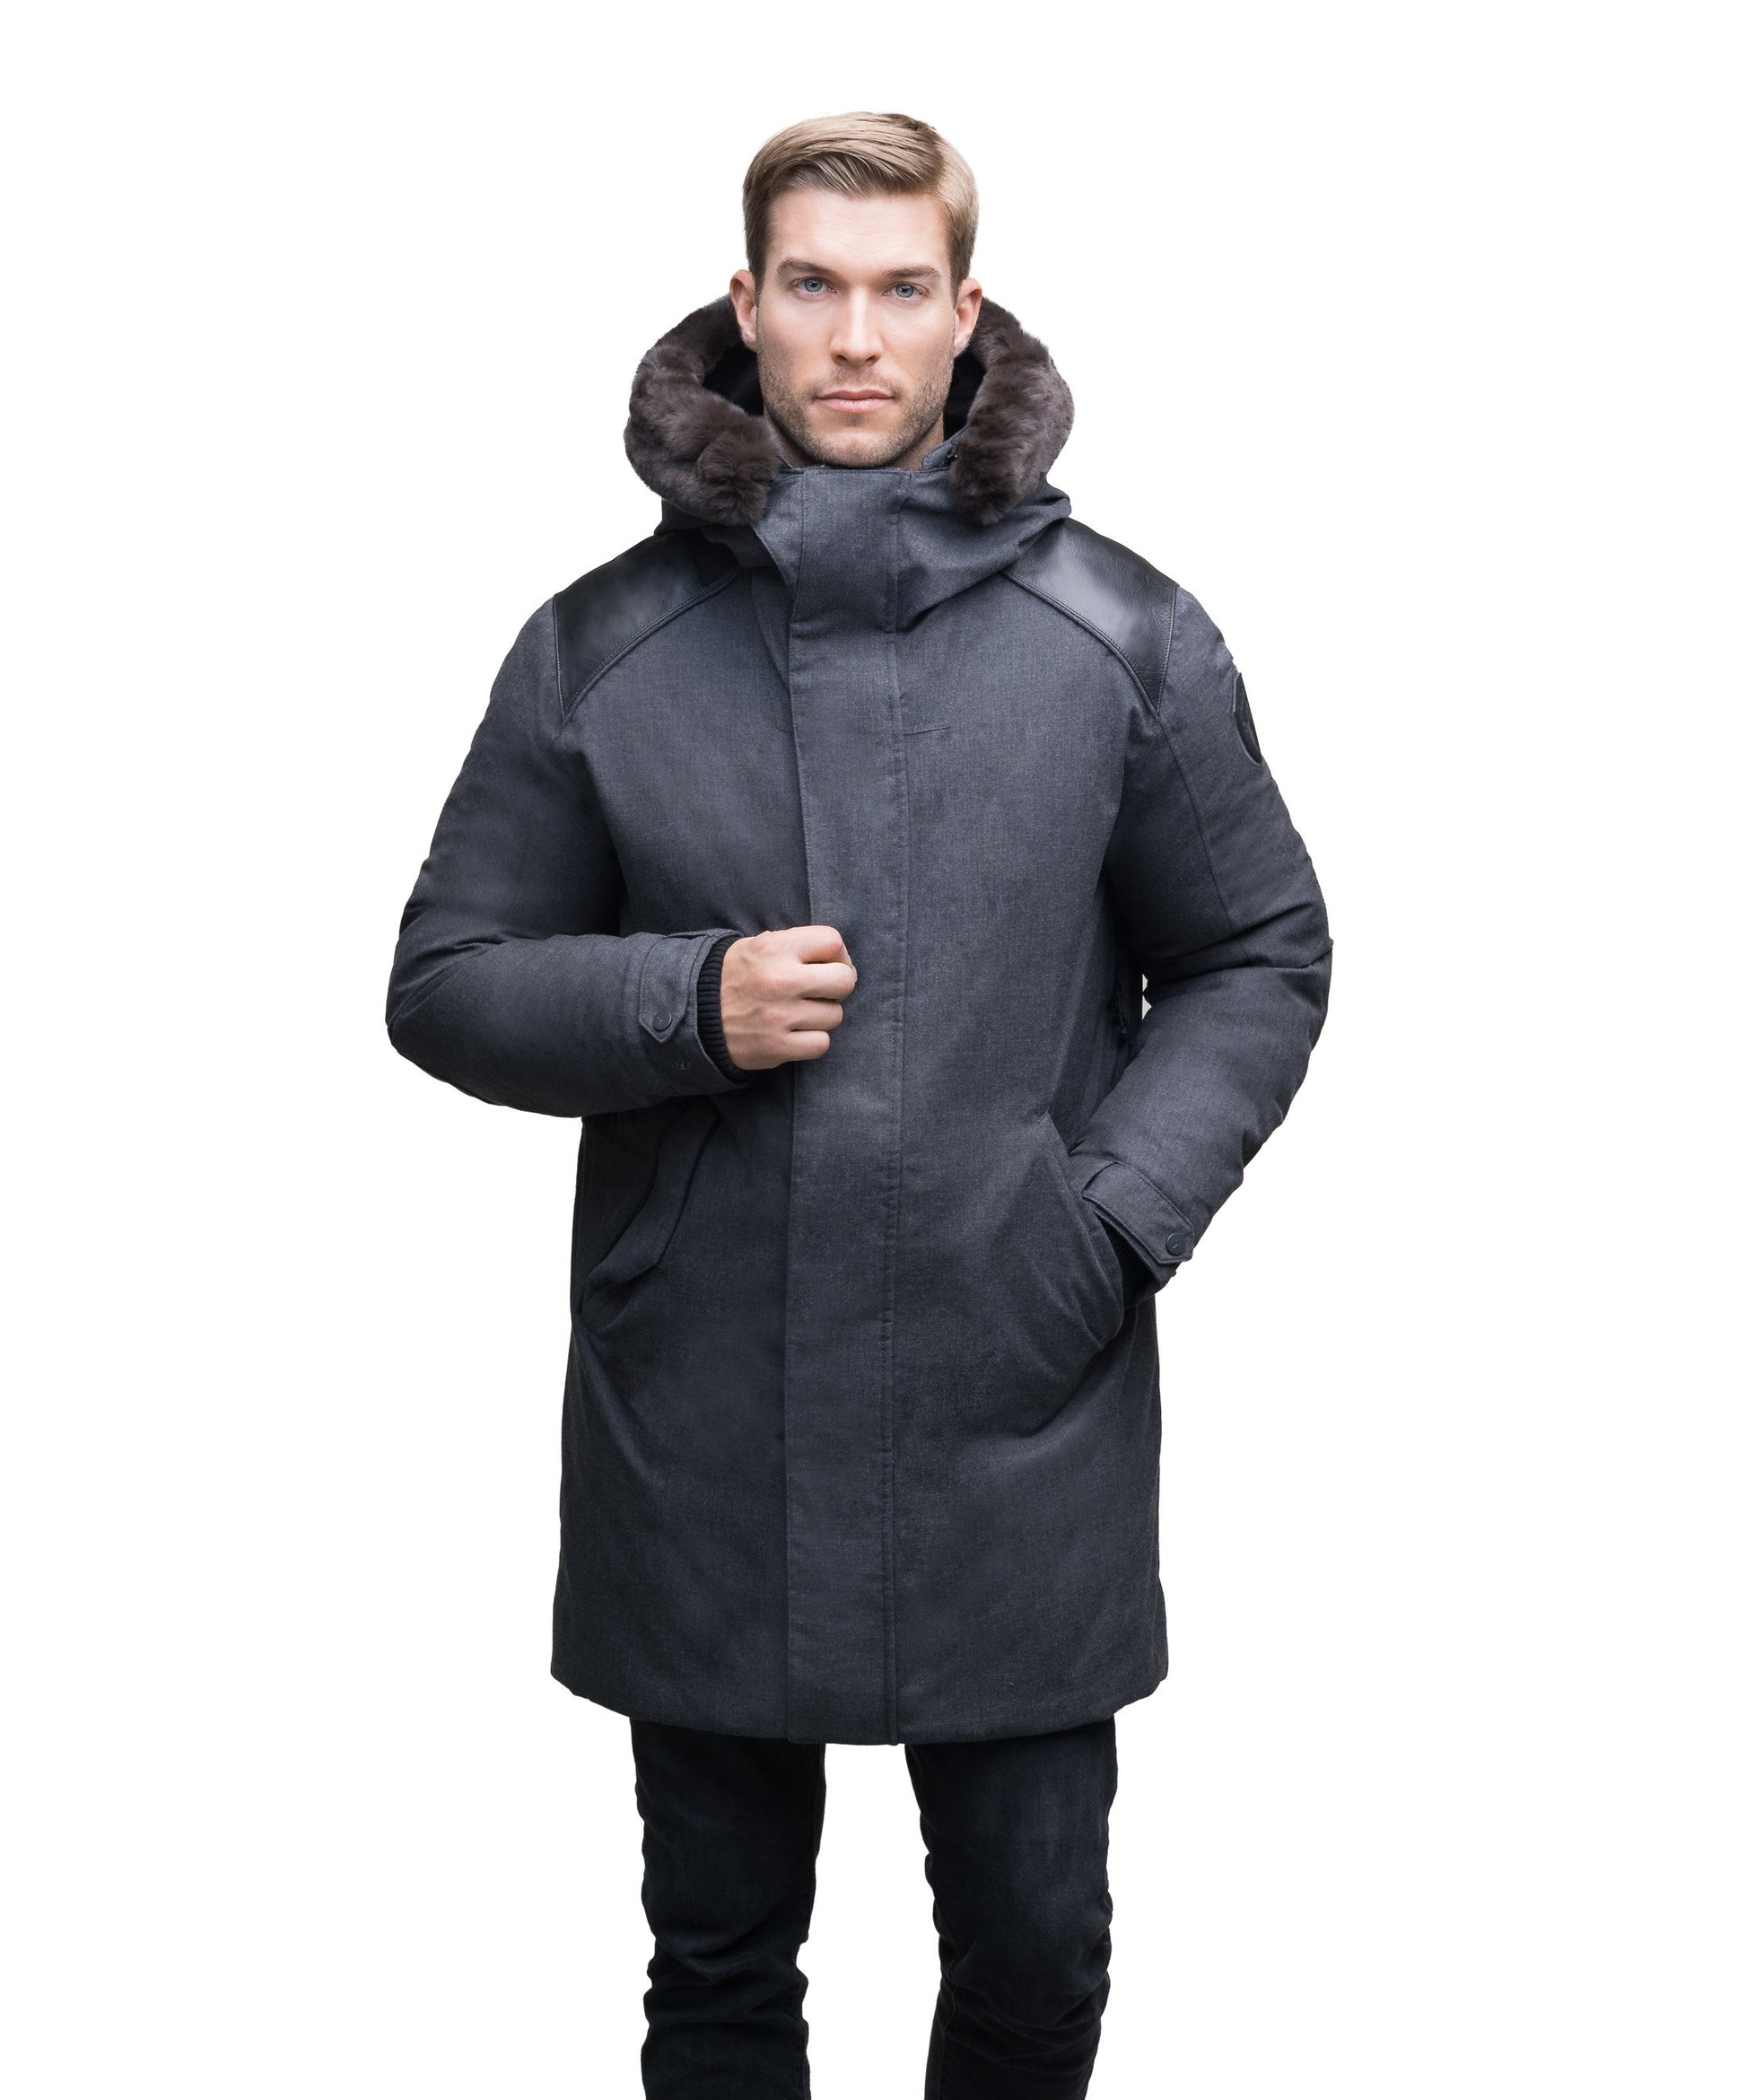 Men's down filled overcoat with premium washable Japanese DWR leather on both shoulders in H. Charcoal